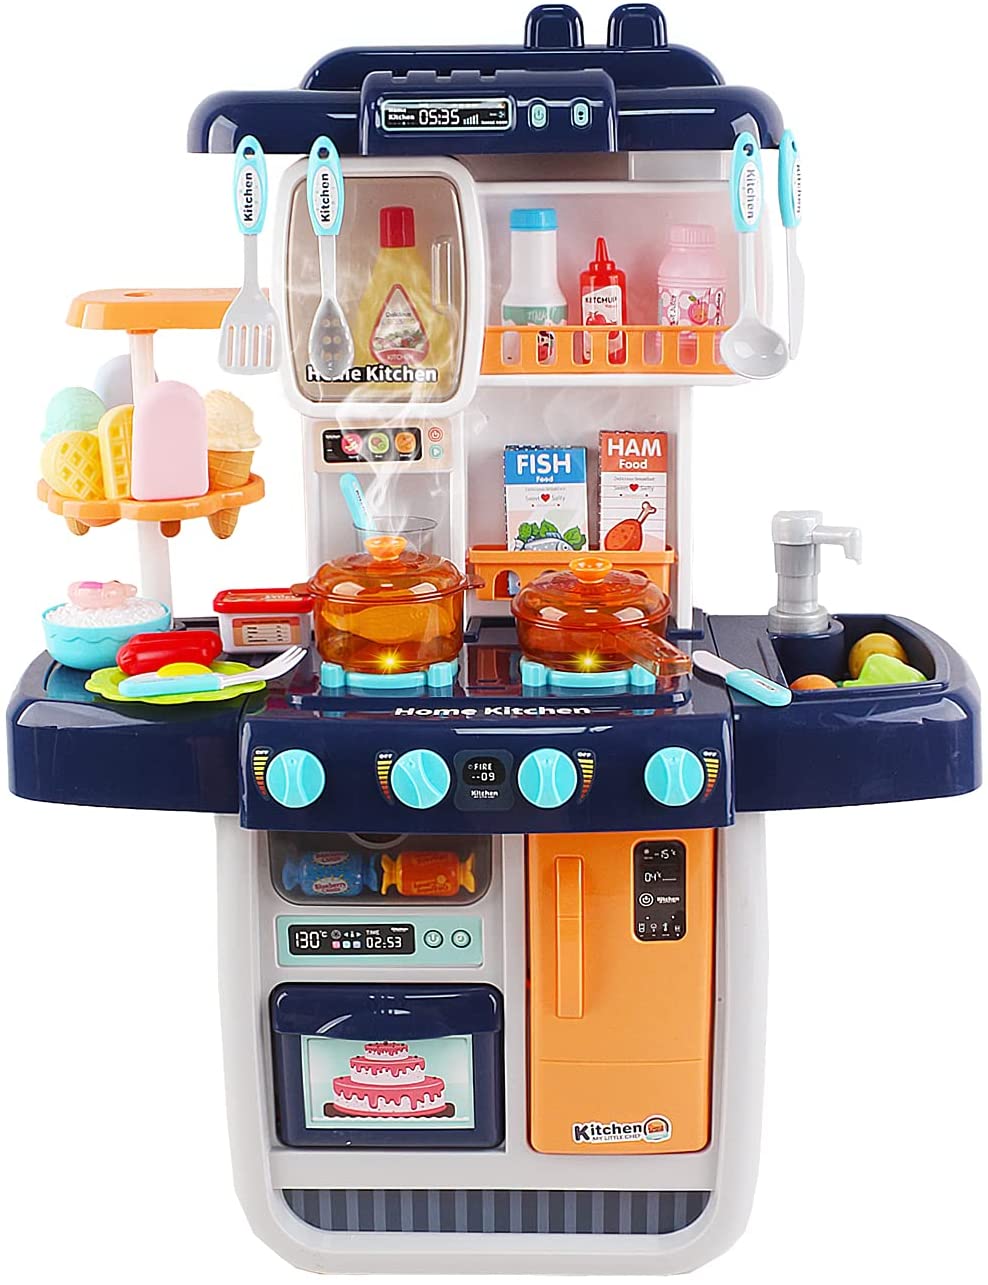 ‘My Little Chef’ Miniature Kitchen Play Set with 34 Accessories, Induction Hob, Water, Light and Sound Features (BLUE)-K3B